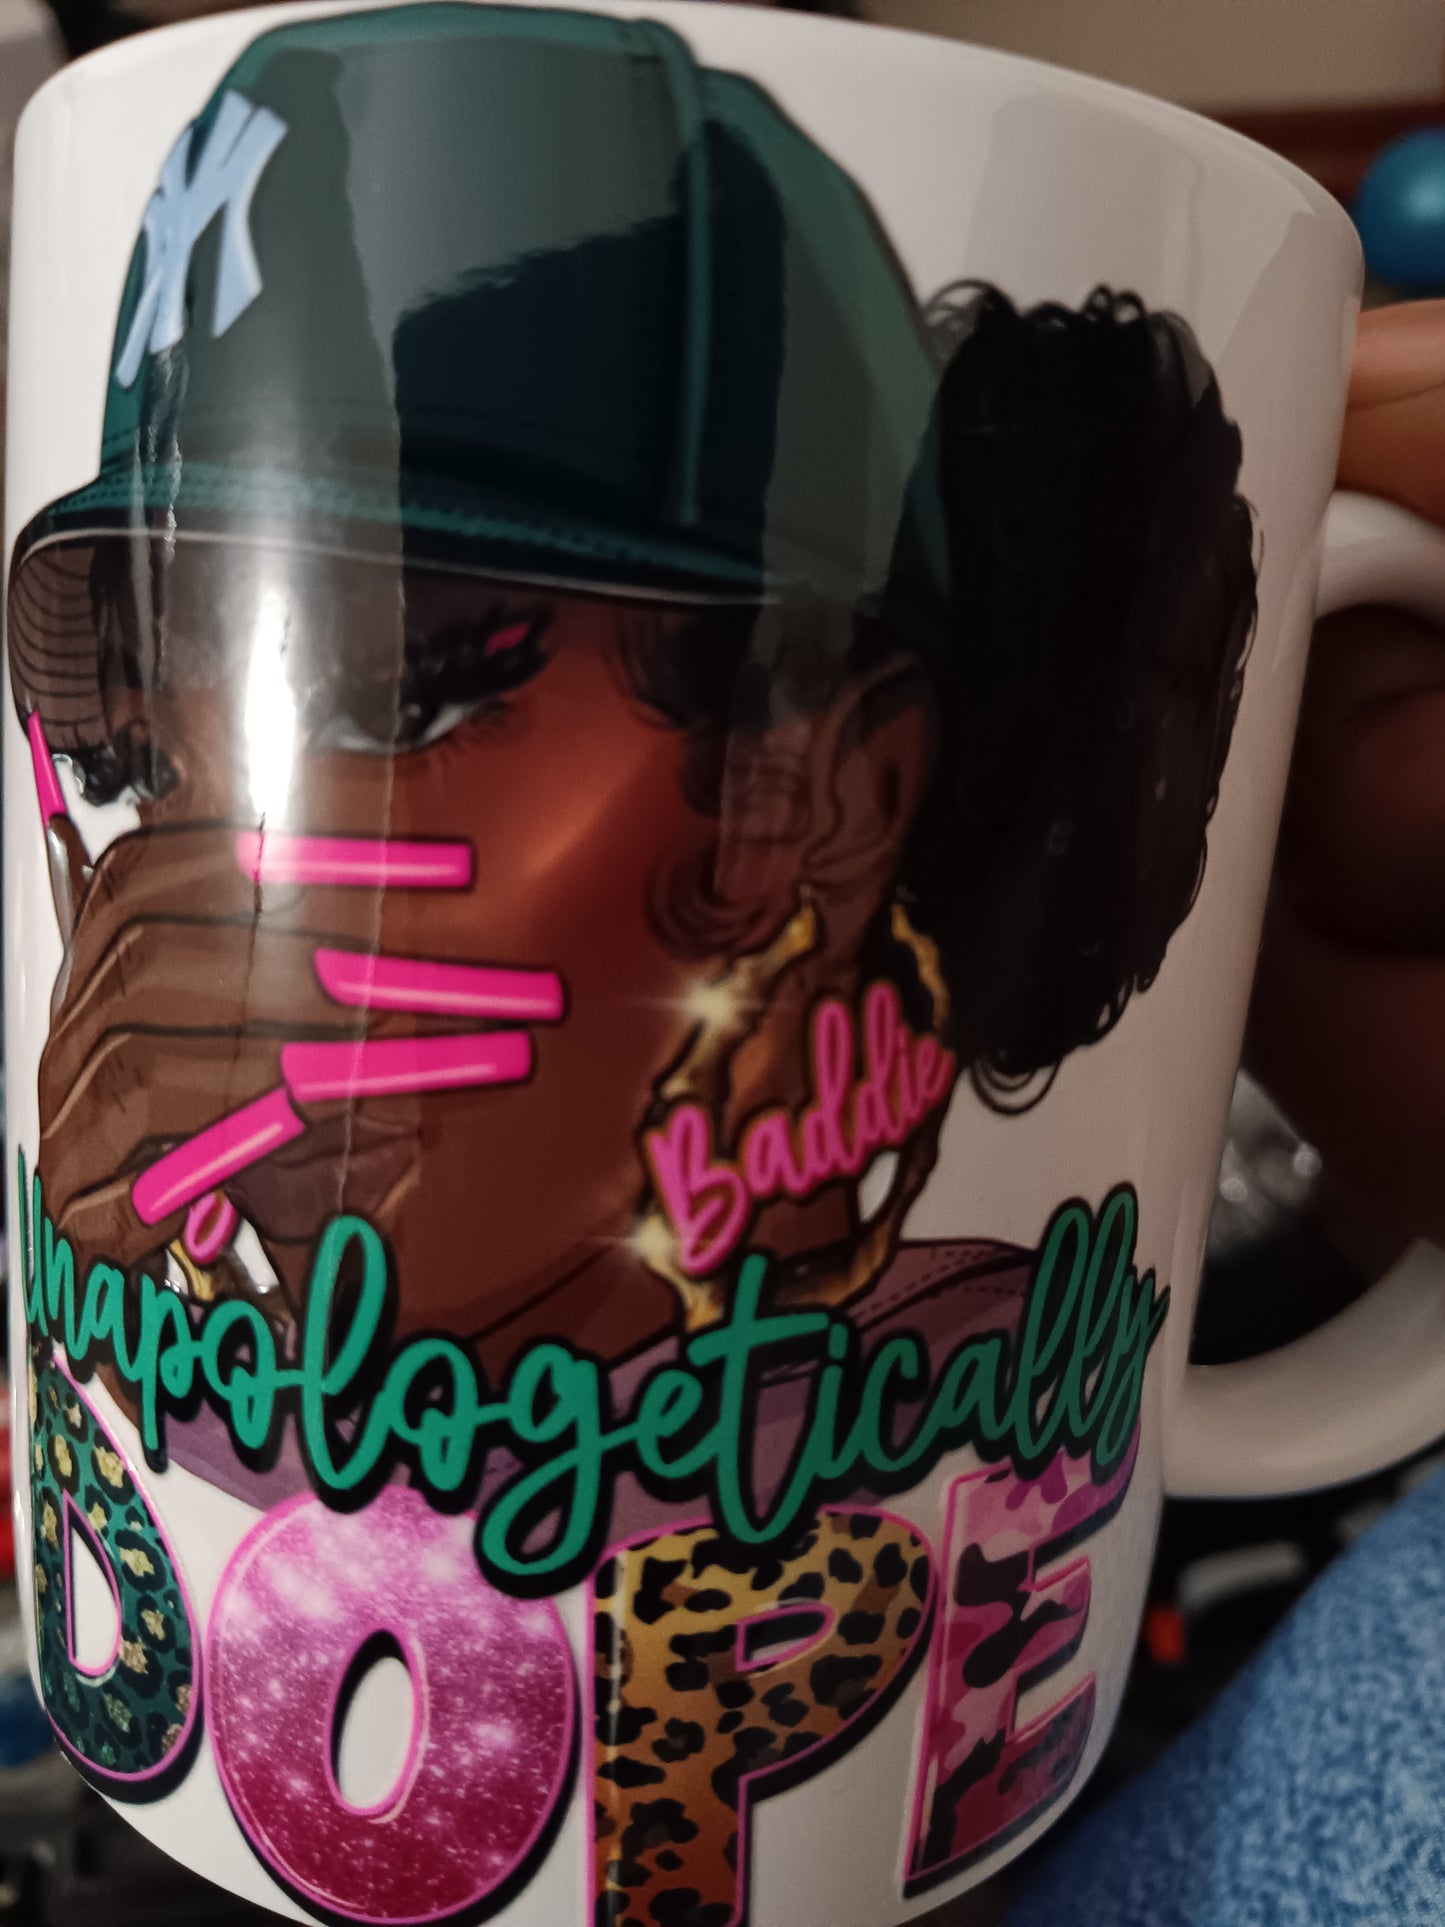 "Unapologetically Dope" Glitter Coffee/Tea Mug with Lady in Green NY Hat